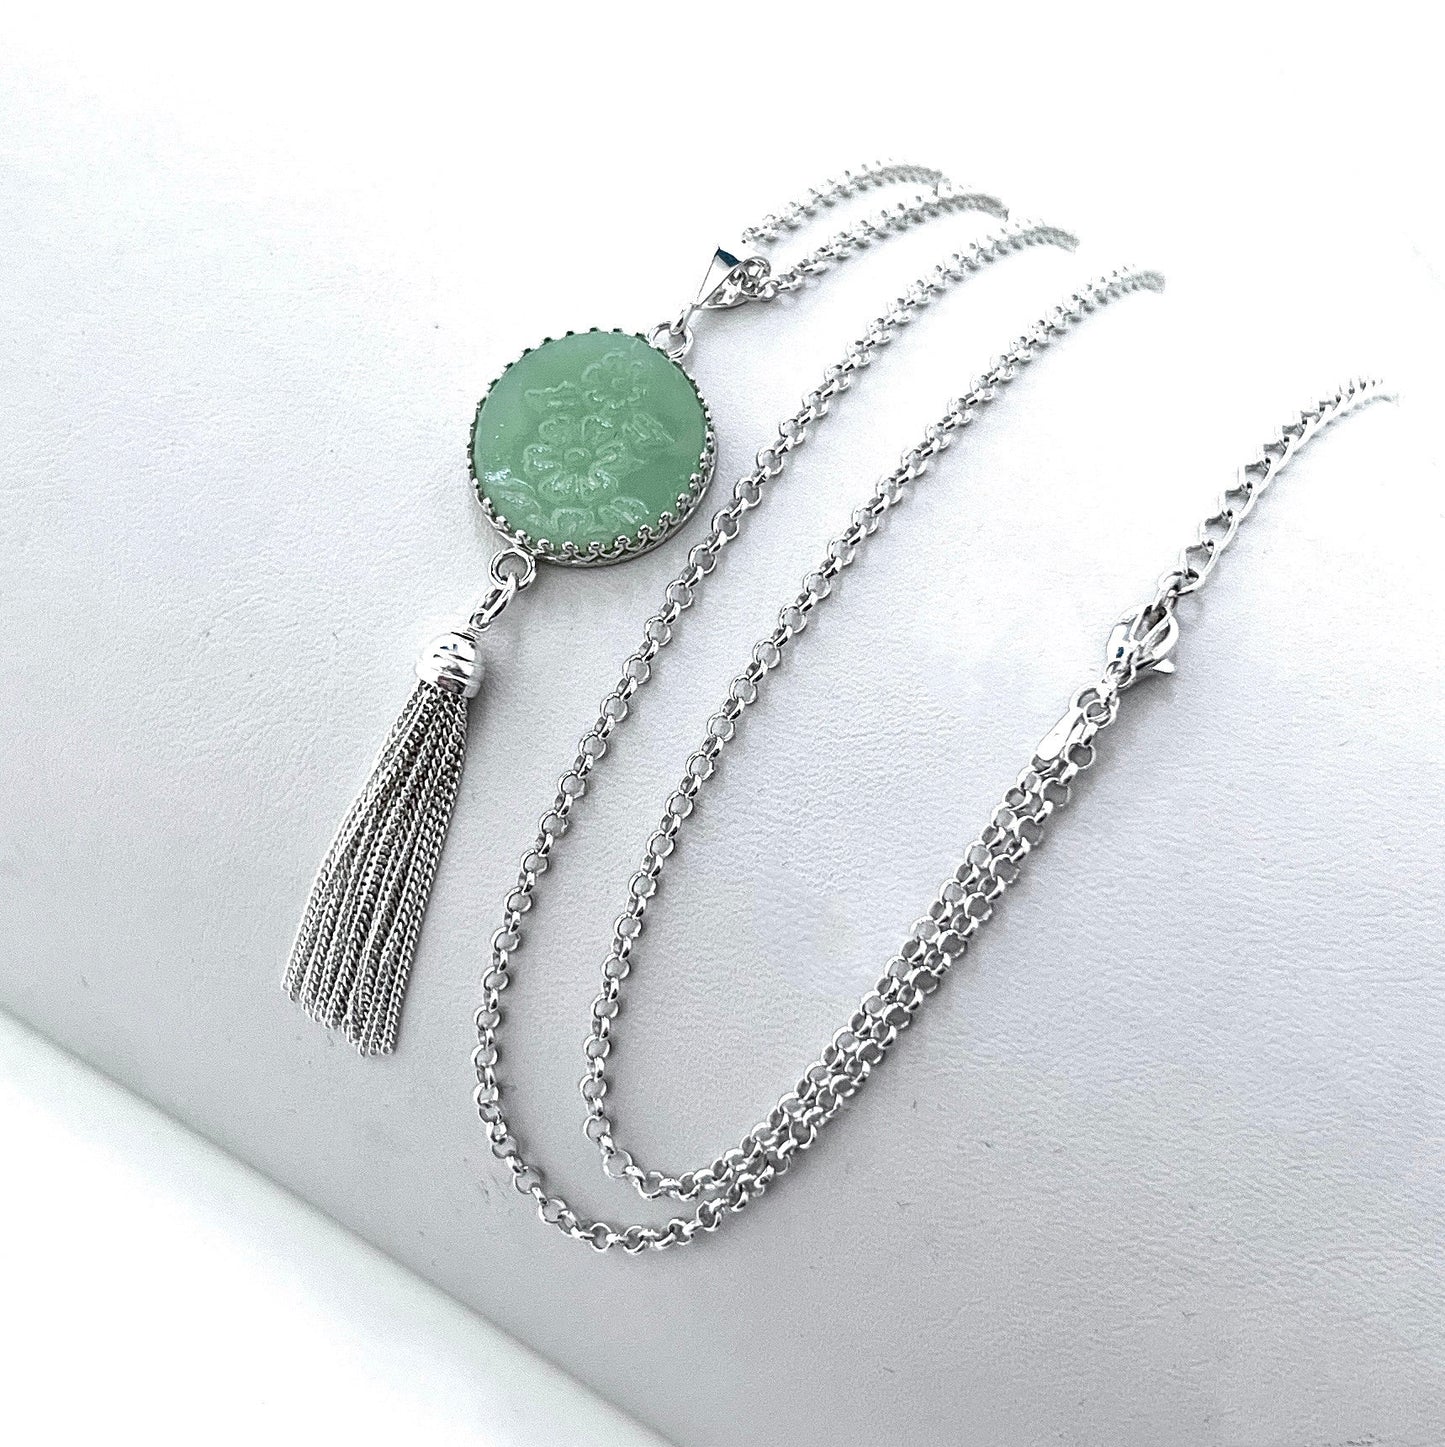 Jadeite Tassel Necklace and Earrings, Adjustable Sterling Silver Necklace, Fire King Alice Jadeite Jewelry Set